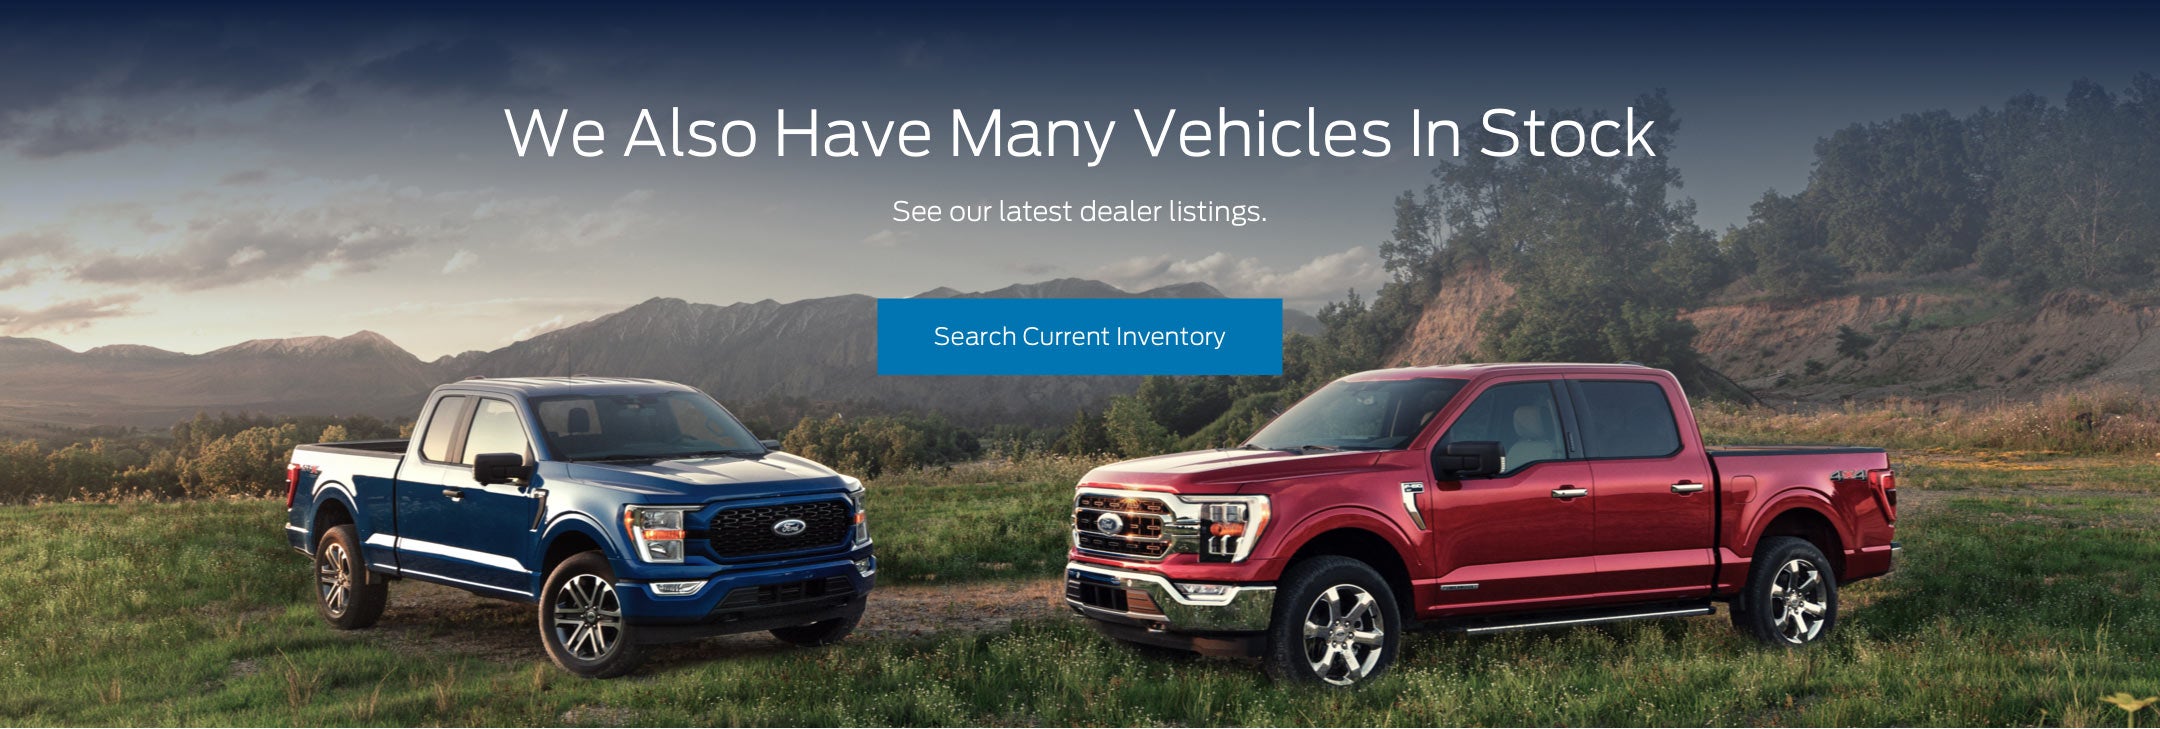 Ford vehicles in stock | Jack Schmitt Ford of Collinsville in Collinsville IL